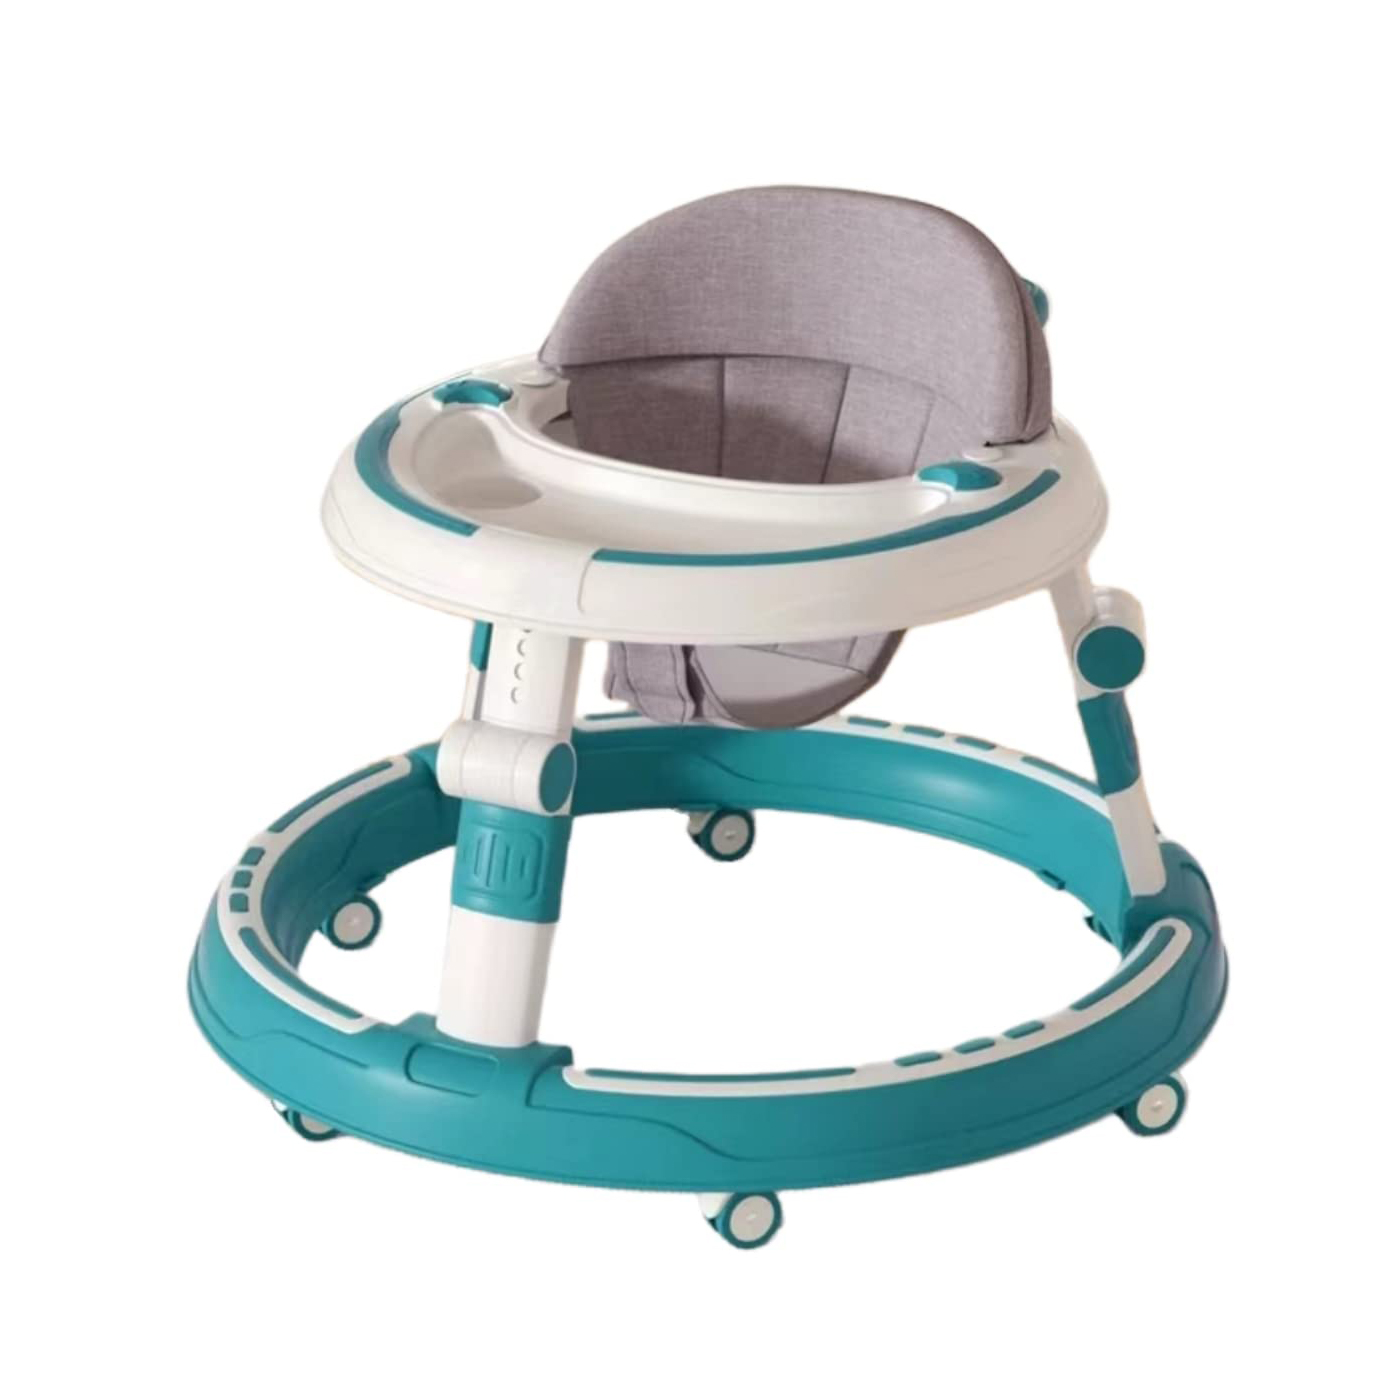 Introducing Our Innovative Baby Walker – The Ultimate Cozy Cruiser! Featured Image